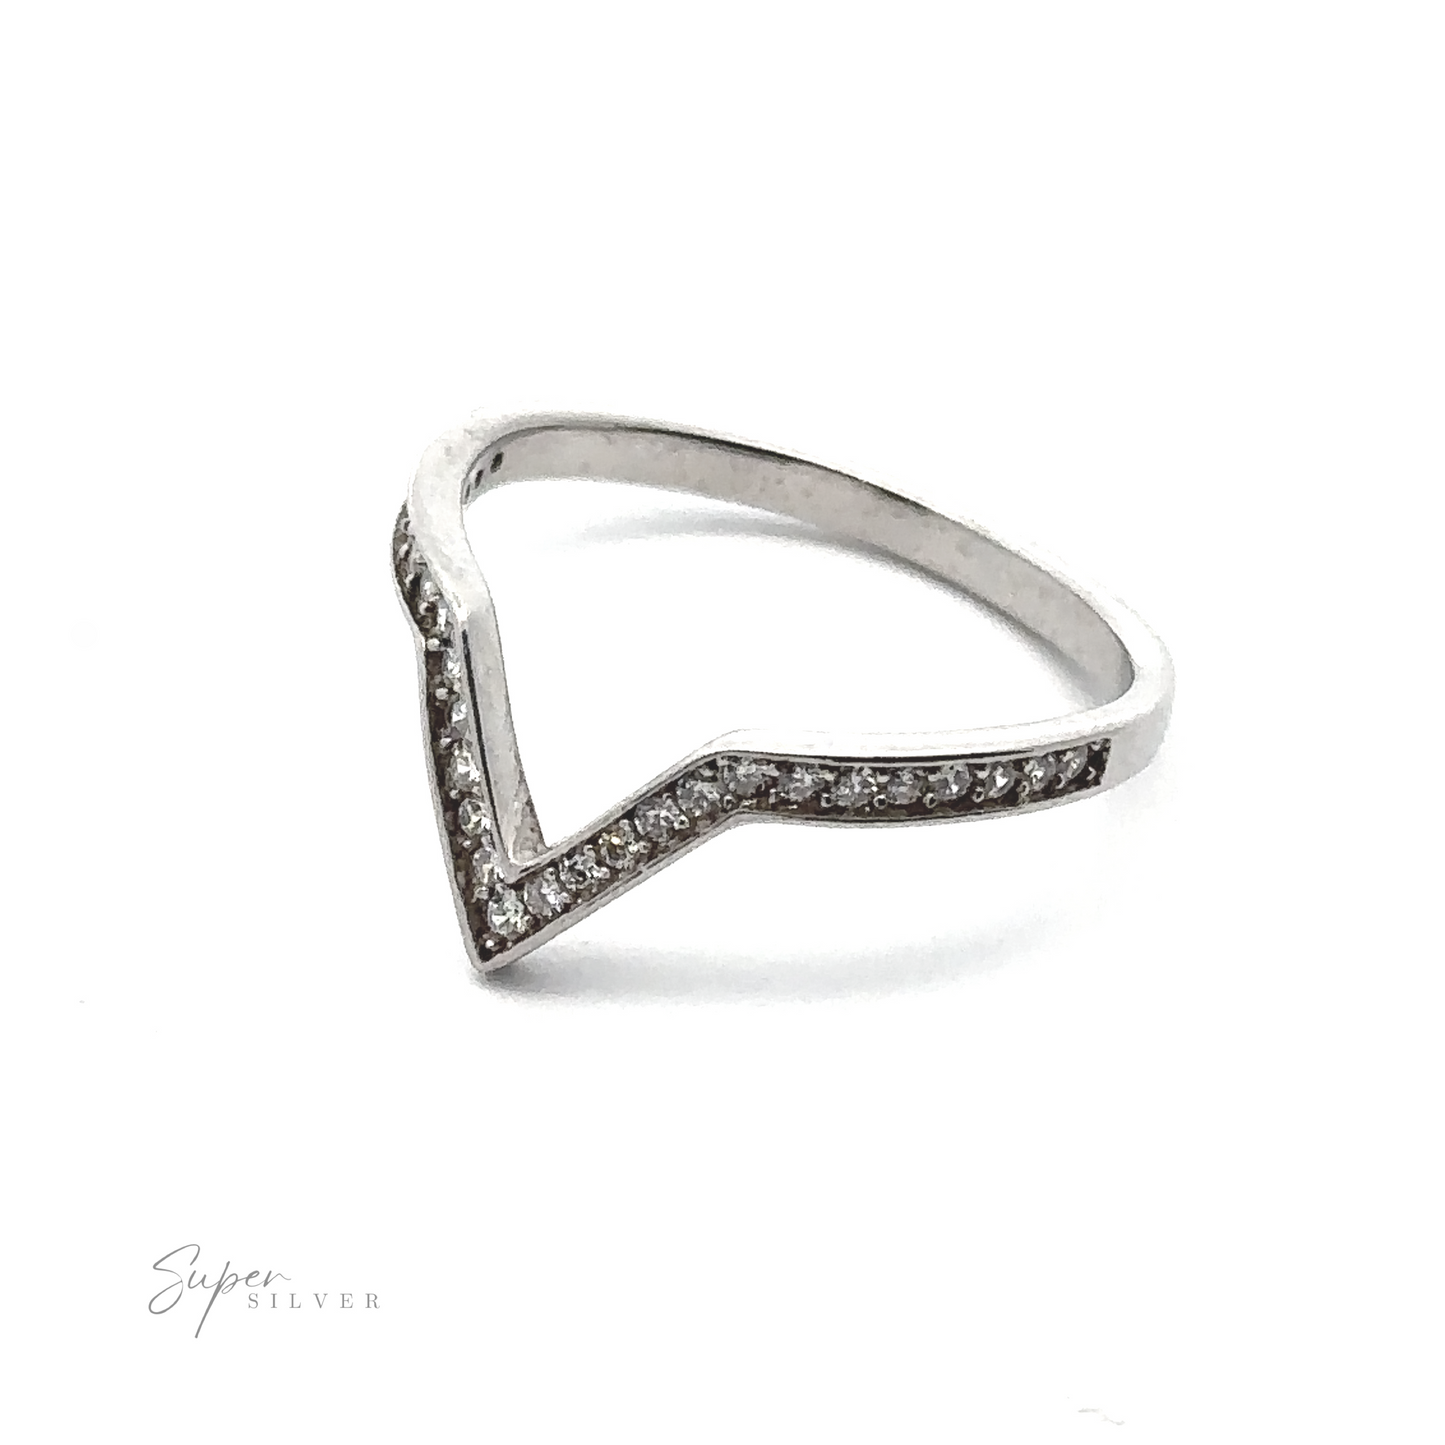 
                  
                    A Channel Set Cubic Zirconia Chevron Ring crafted from rhodium-plated .925 sterling silver with a V-shaped design, encrusted with small diamonds along the top edge. The brand name "Super Silver" is subtly visible in the bottom left corner.
                  
                